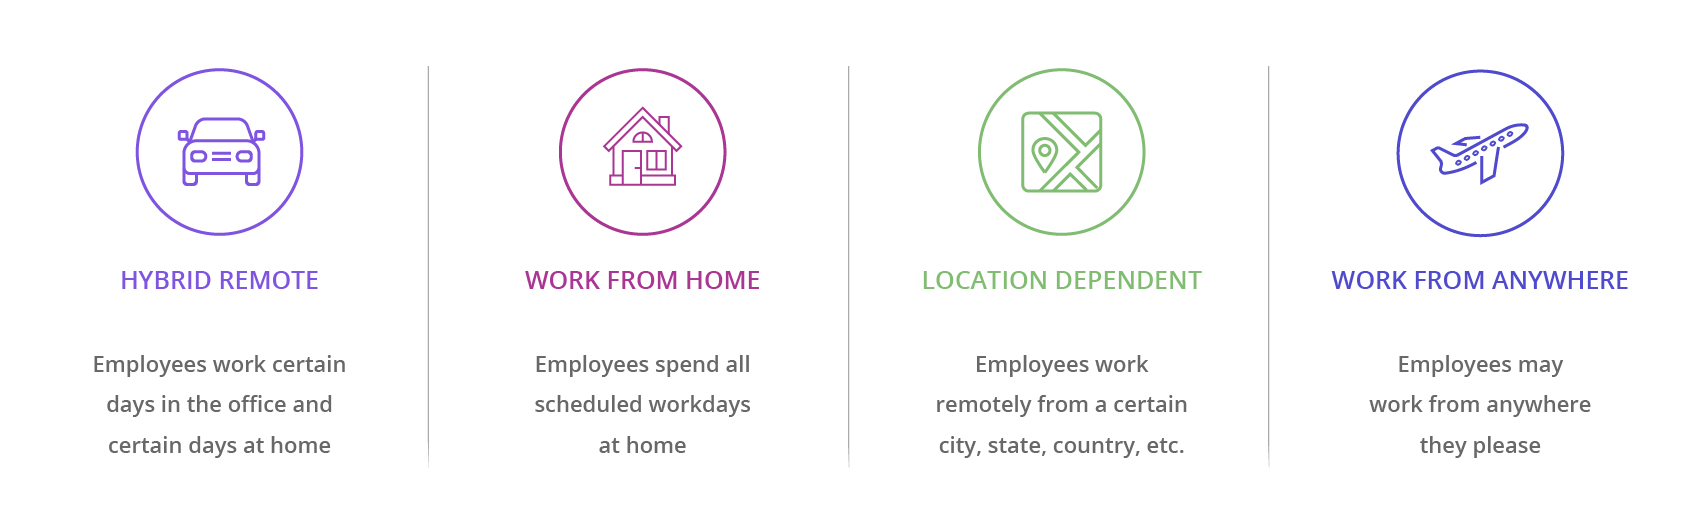 Types of remote work and WFA companies